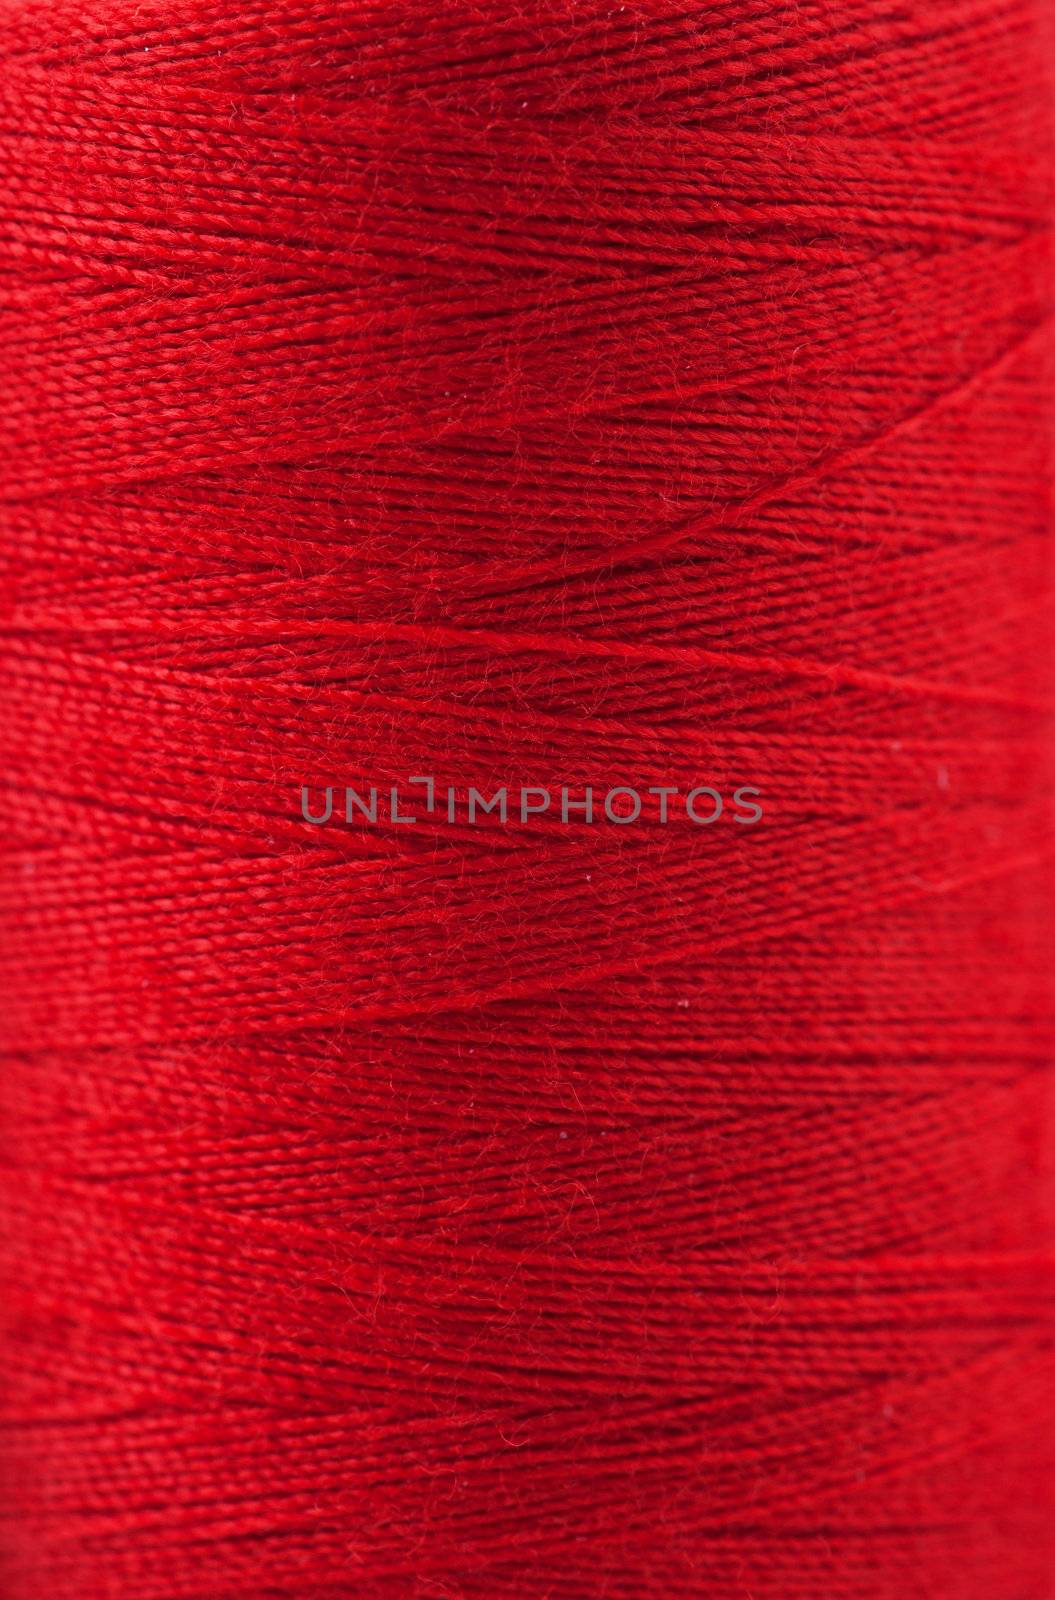 Macro view of red thread wound on a spool